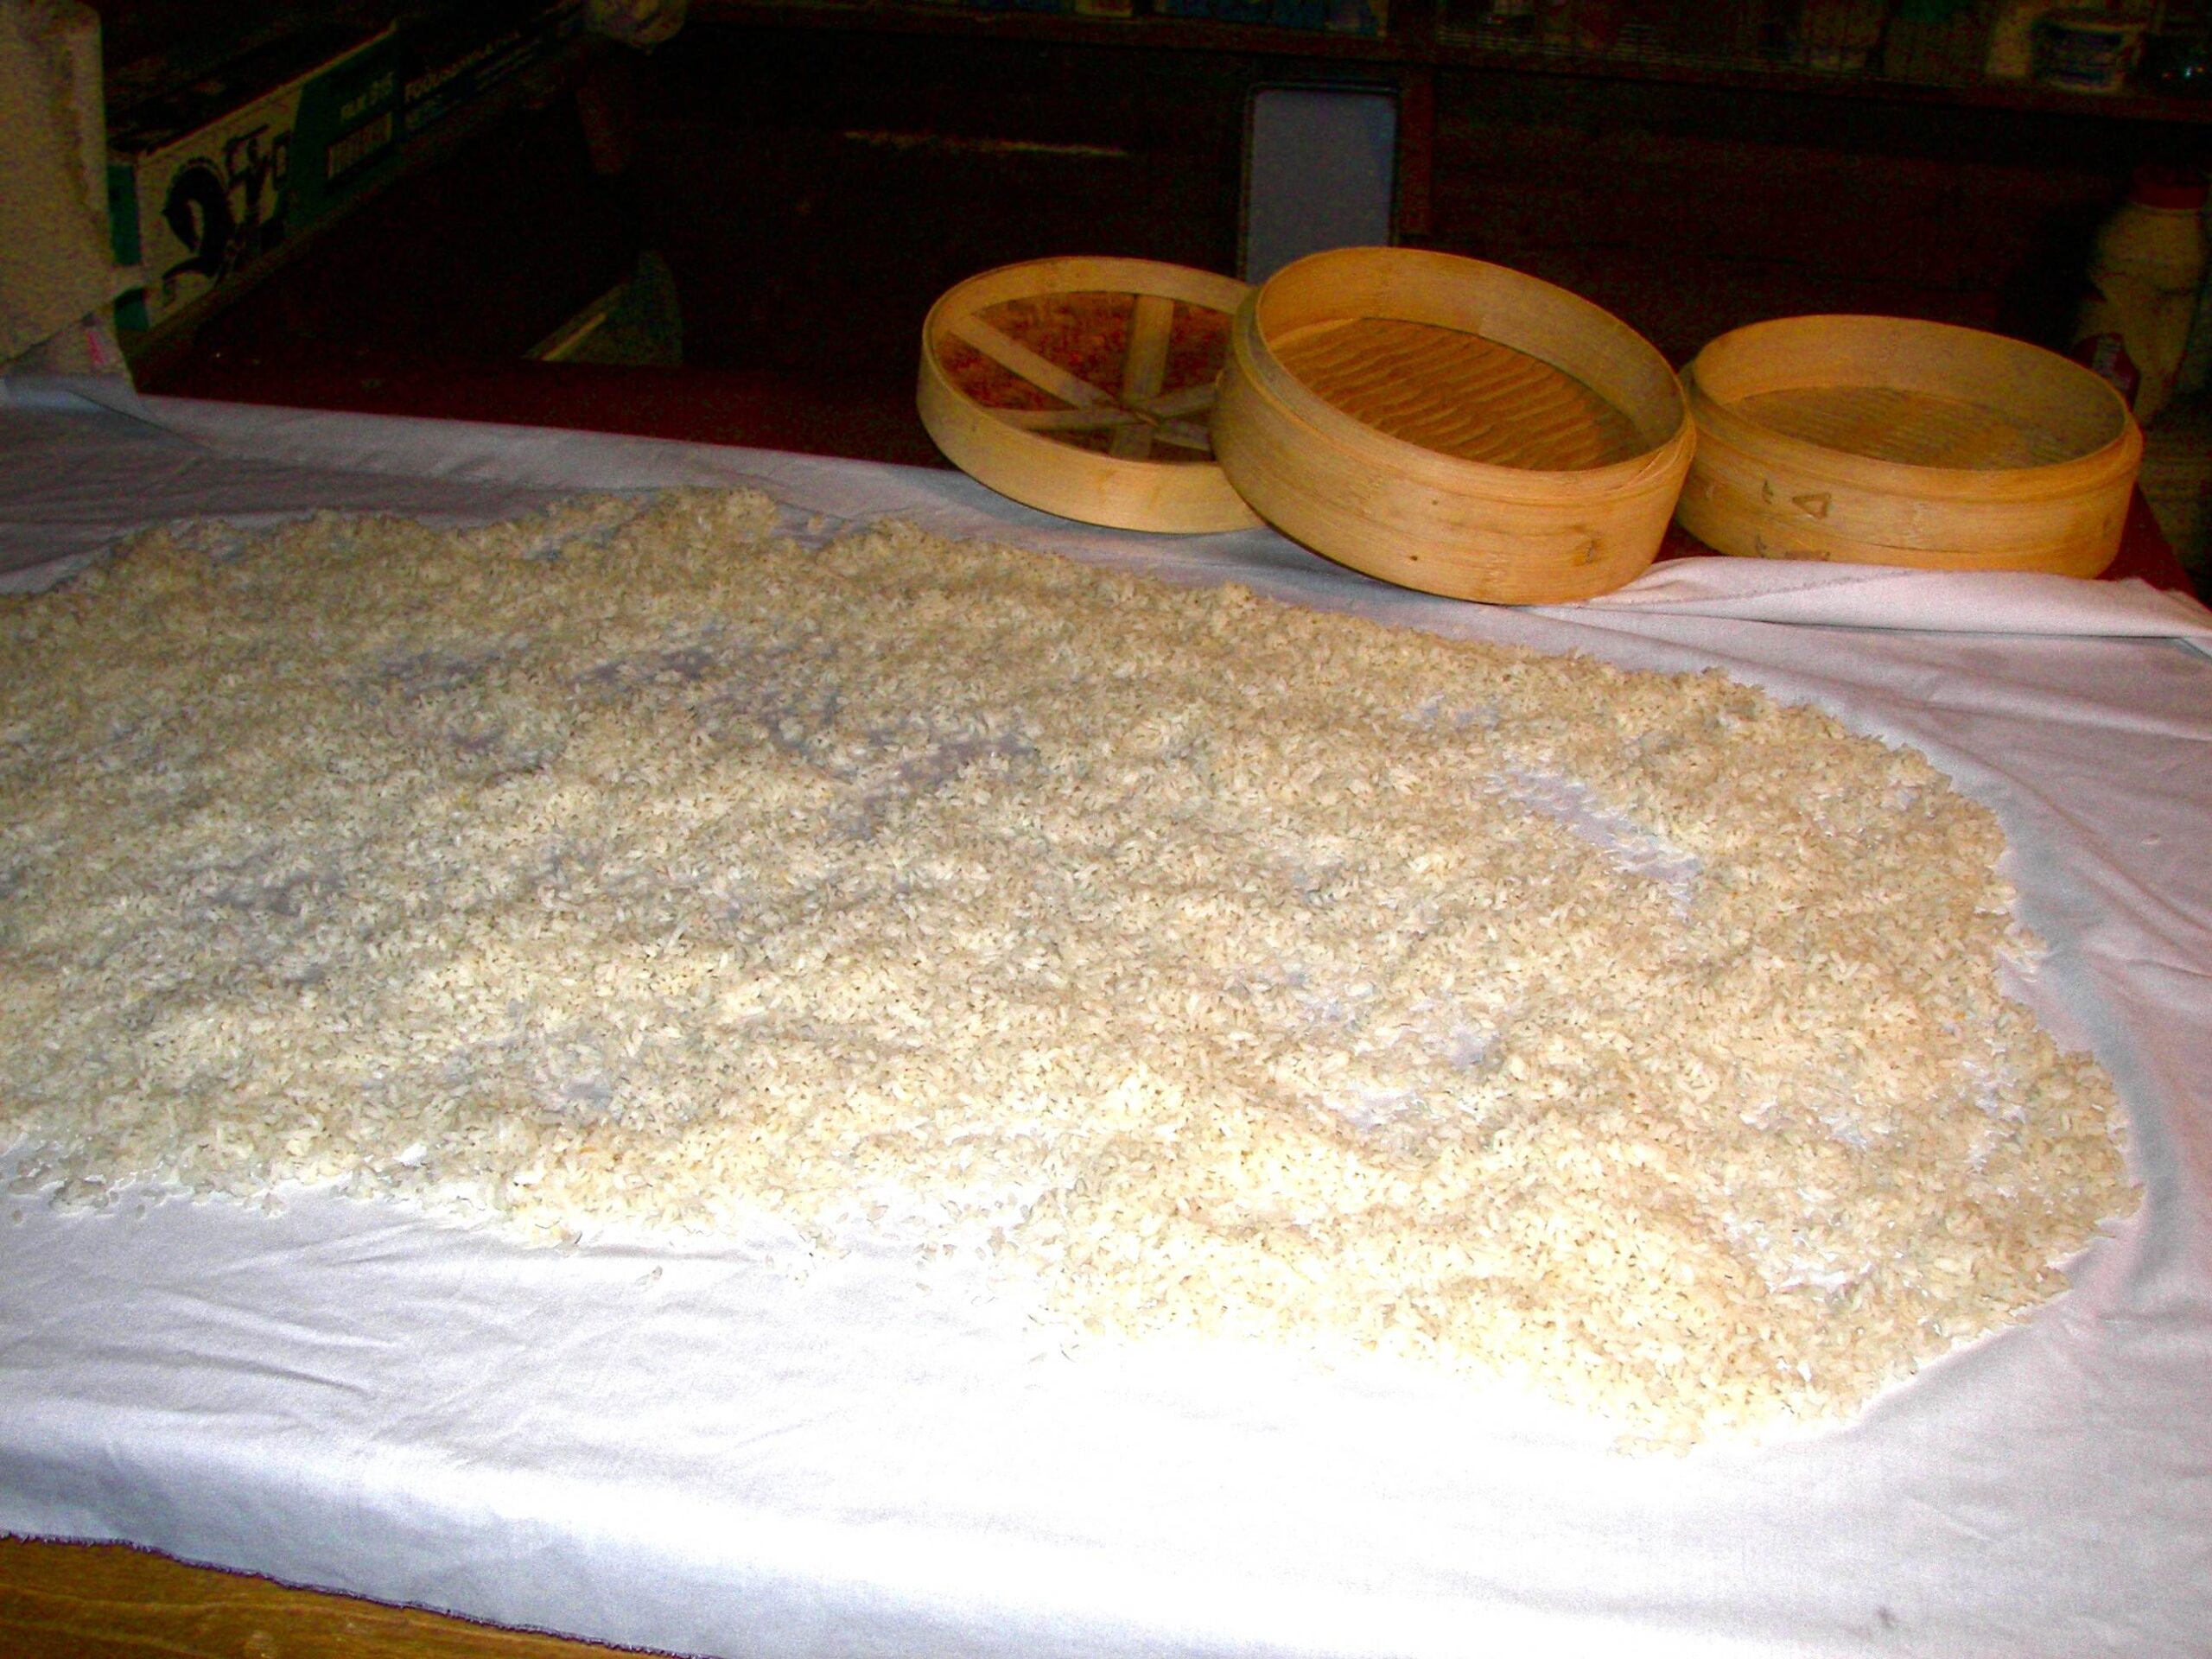 Photograph of sake rice grains spread out on a white cloth to be cooled during the sake brewing process.